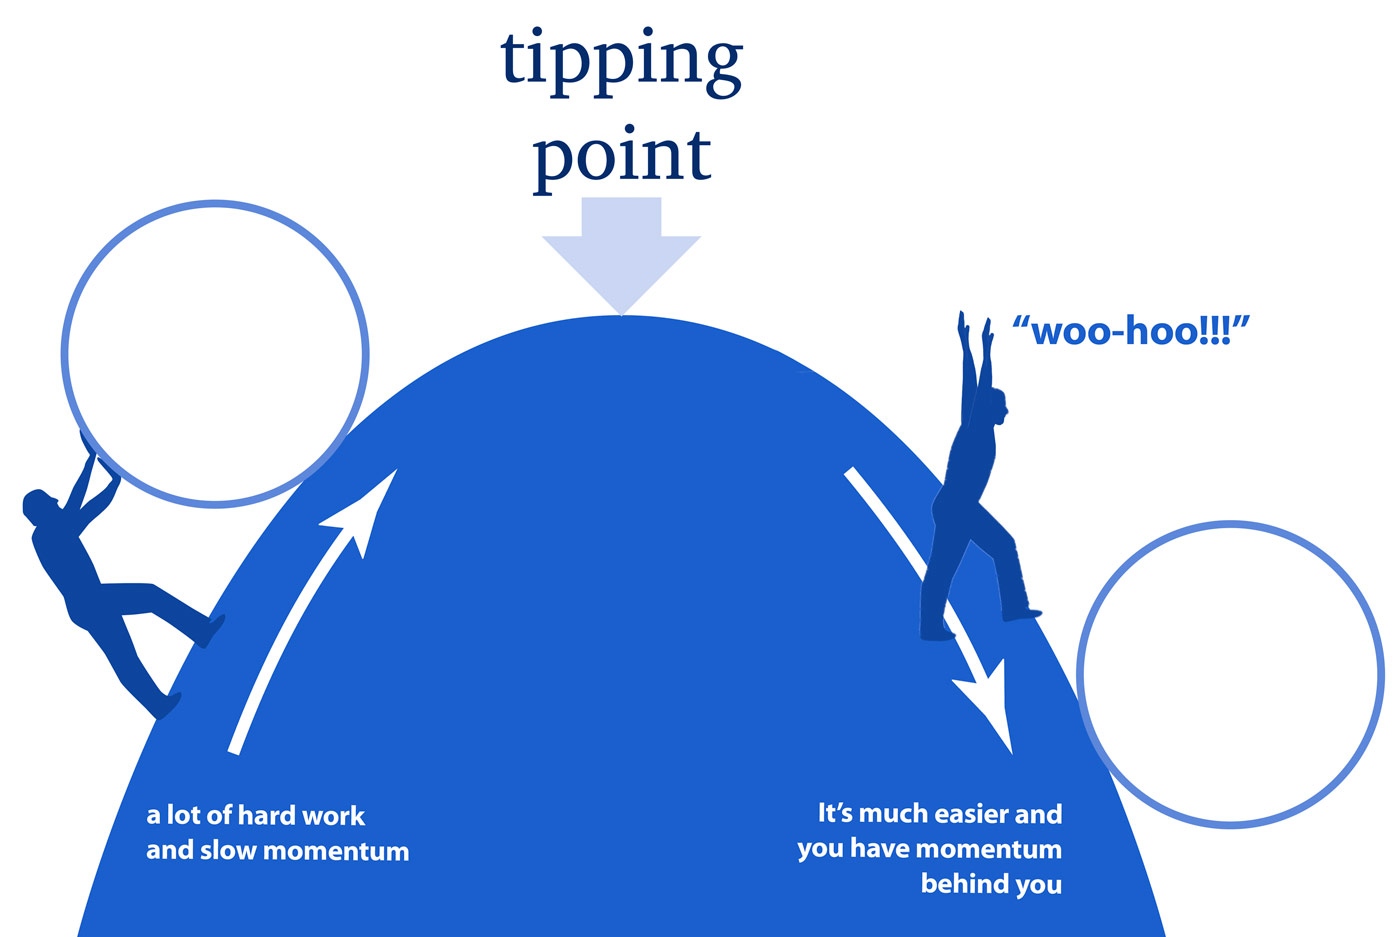 the tipping point is the moment at which "an idea, trend, or social be...